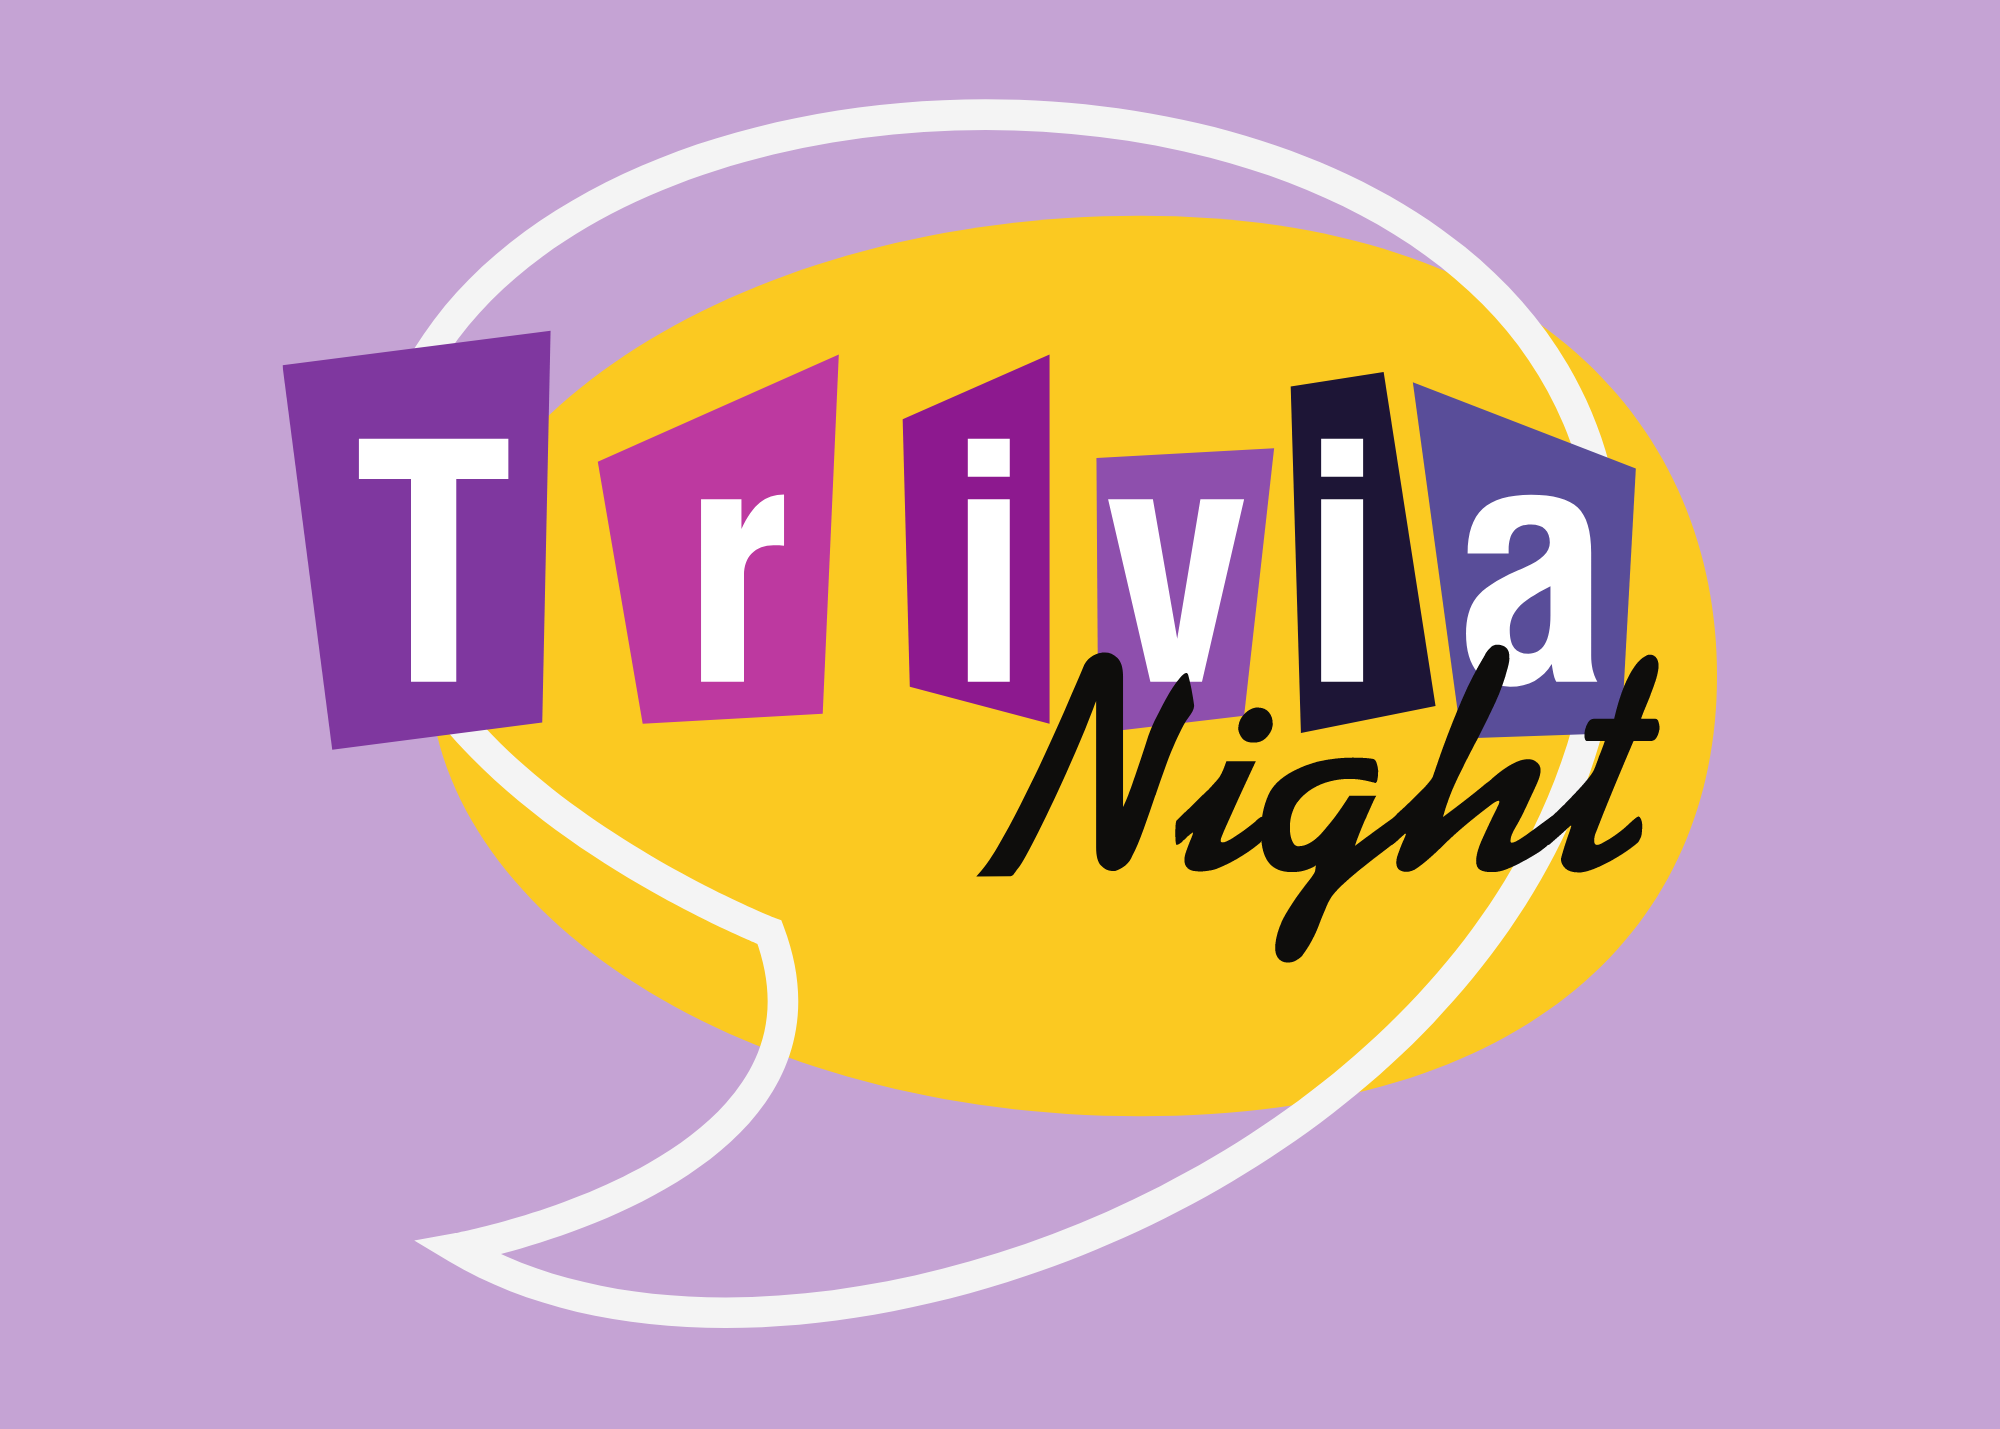 The text "Trivia Night" on a yellow speech bubble with a light purple background. The text has a retro game show vibe.